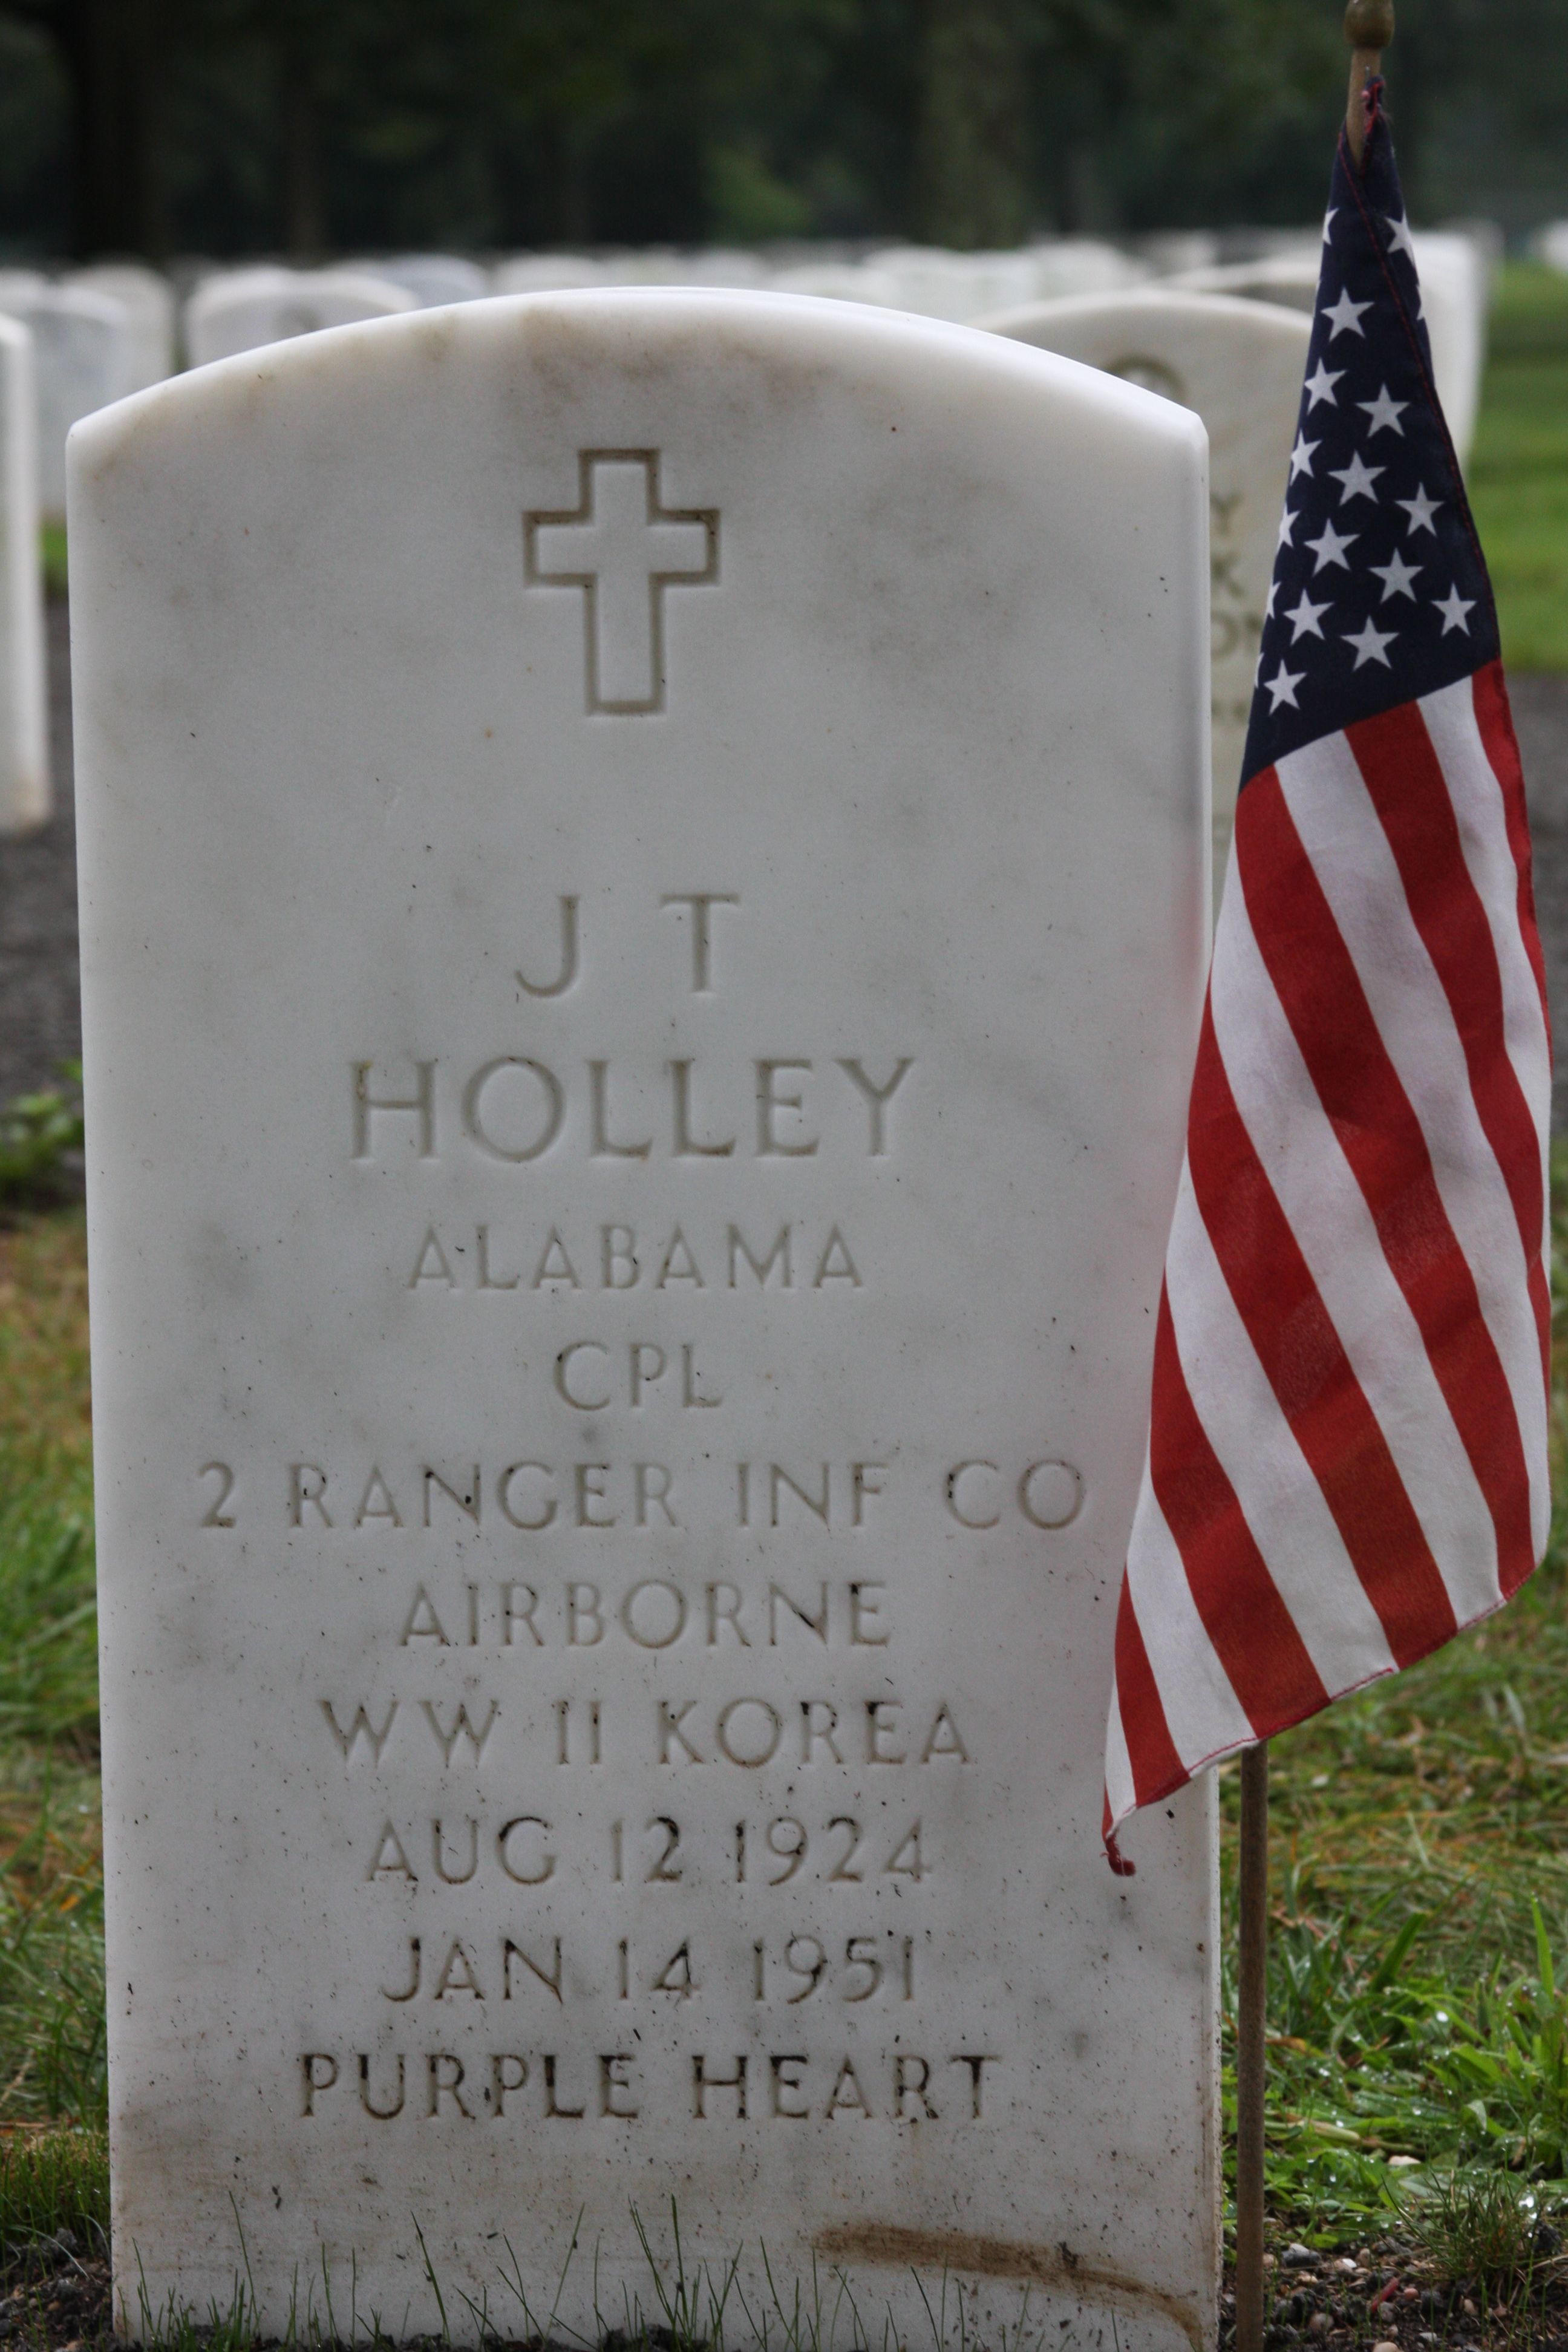 J. Holley (Grave)